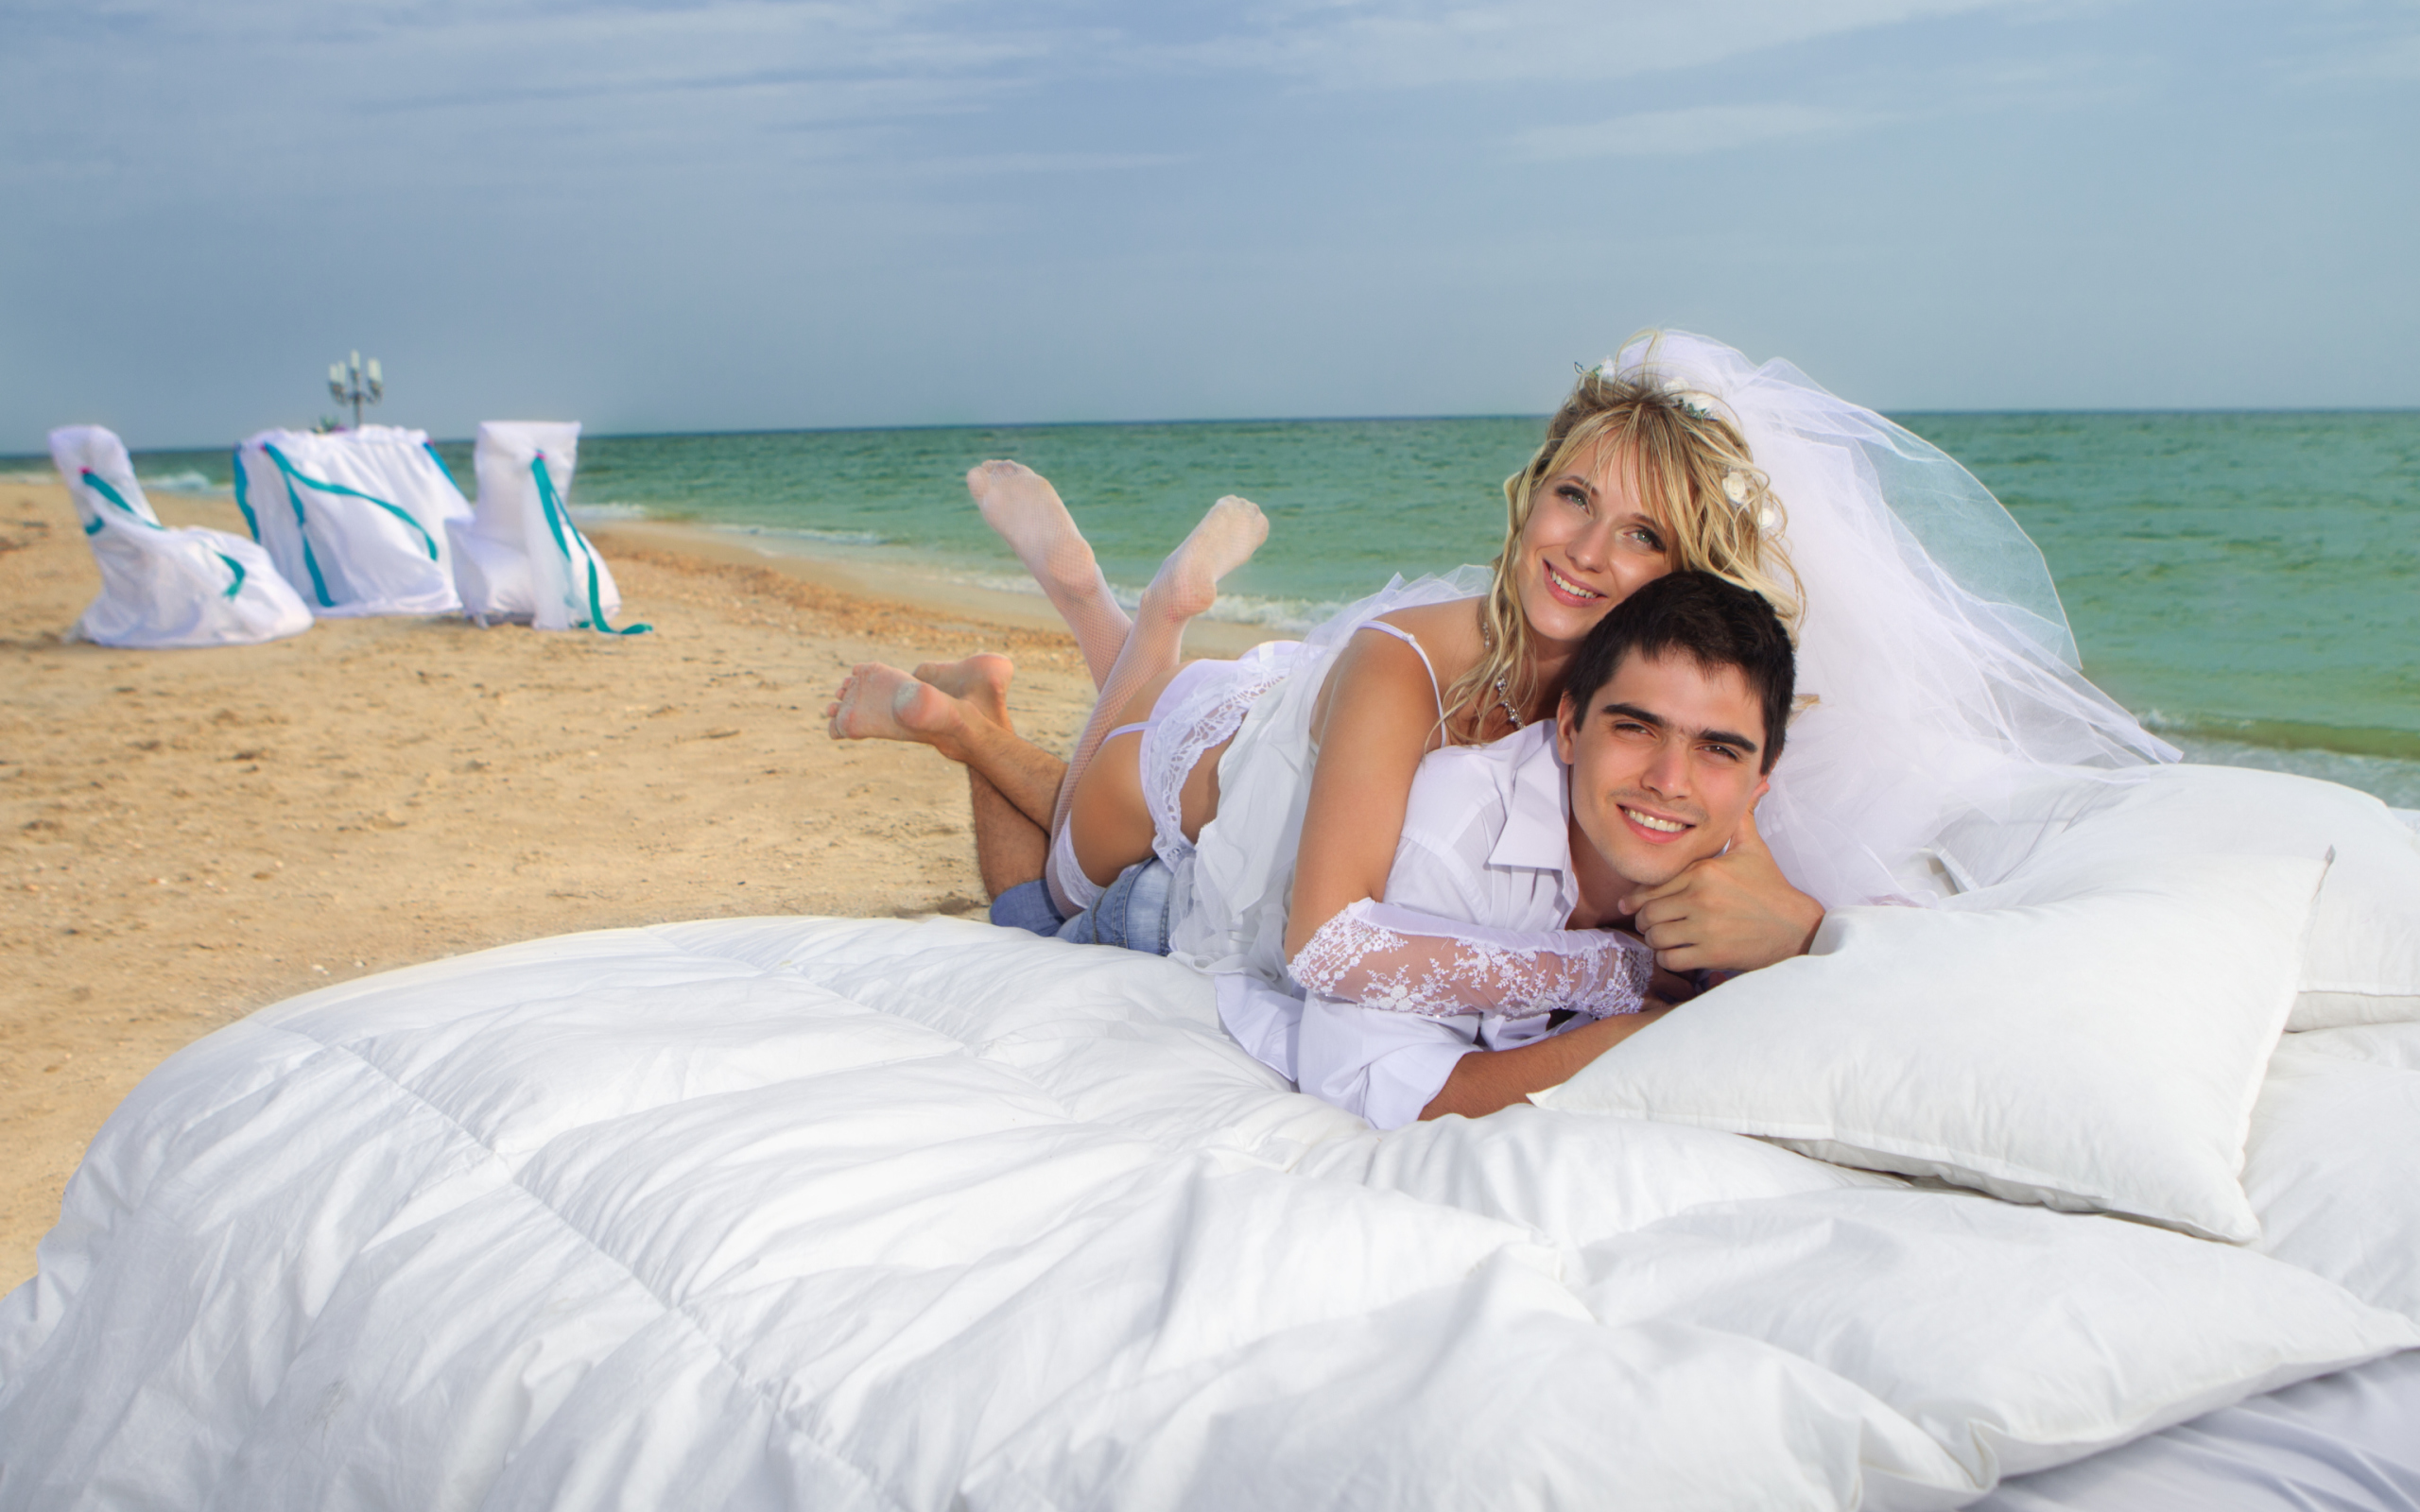 Just Married On Beach wallpaper 2560x1600